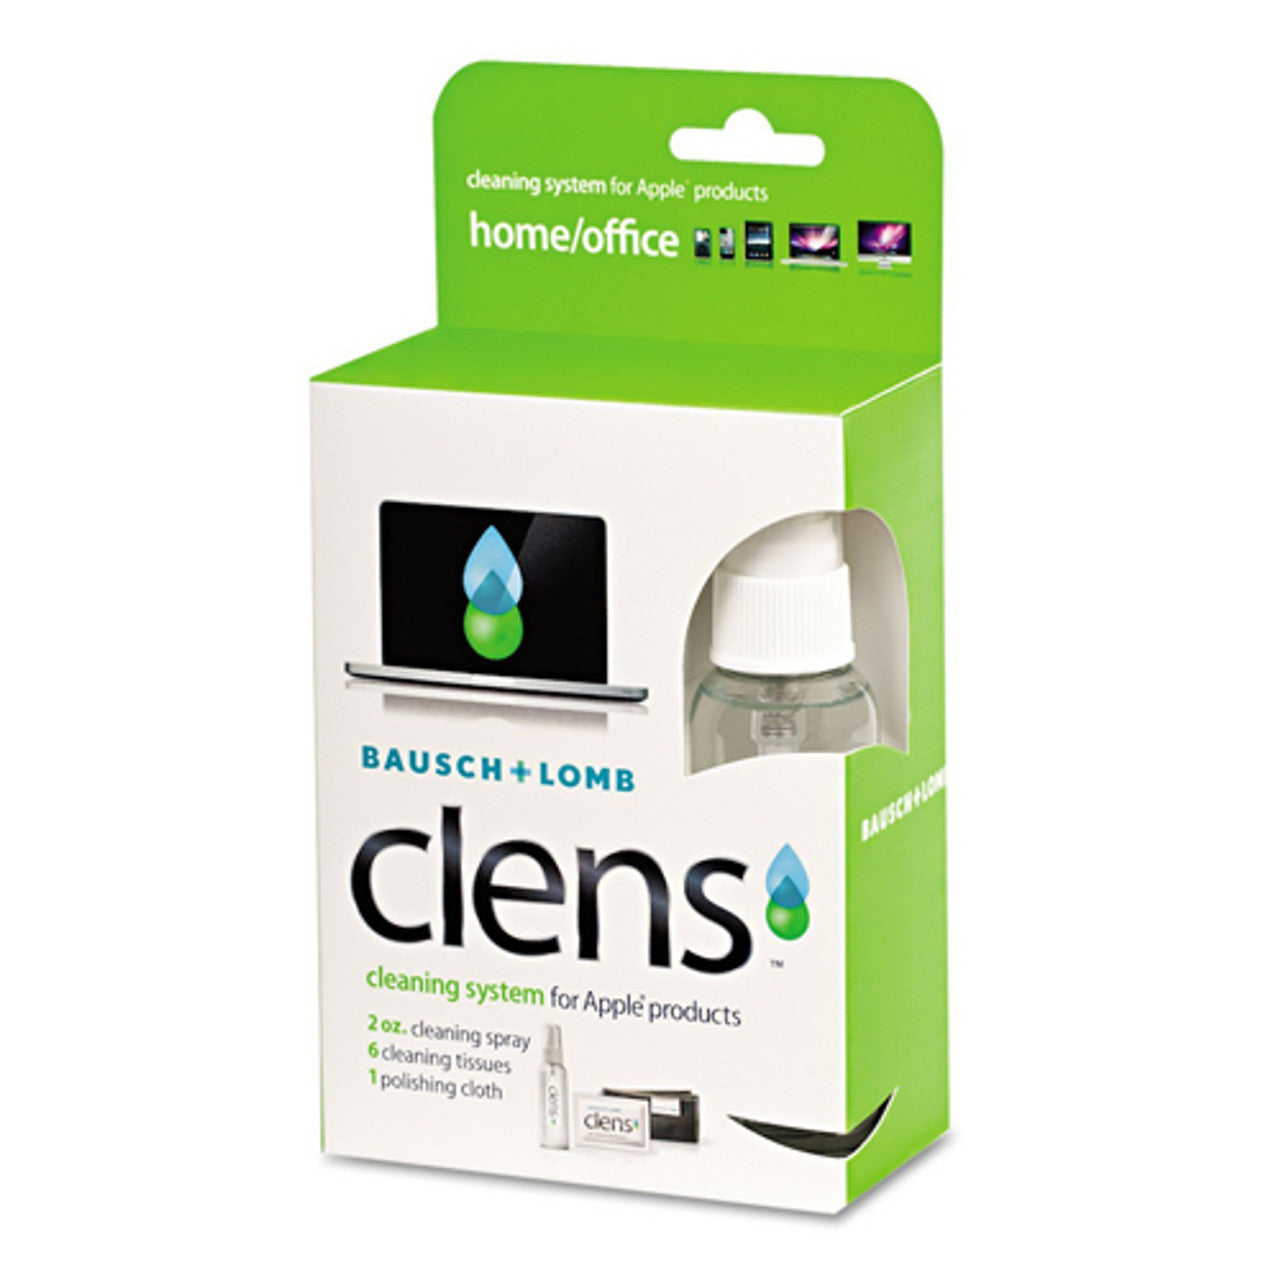 Bausch And Lomb Clens Cleaning System For Apple Products Kit, 1 Ea